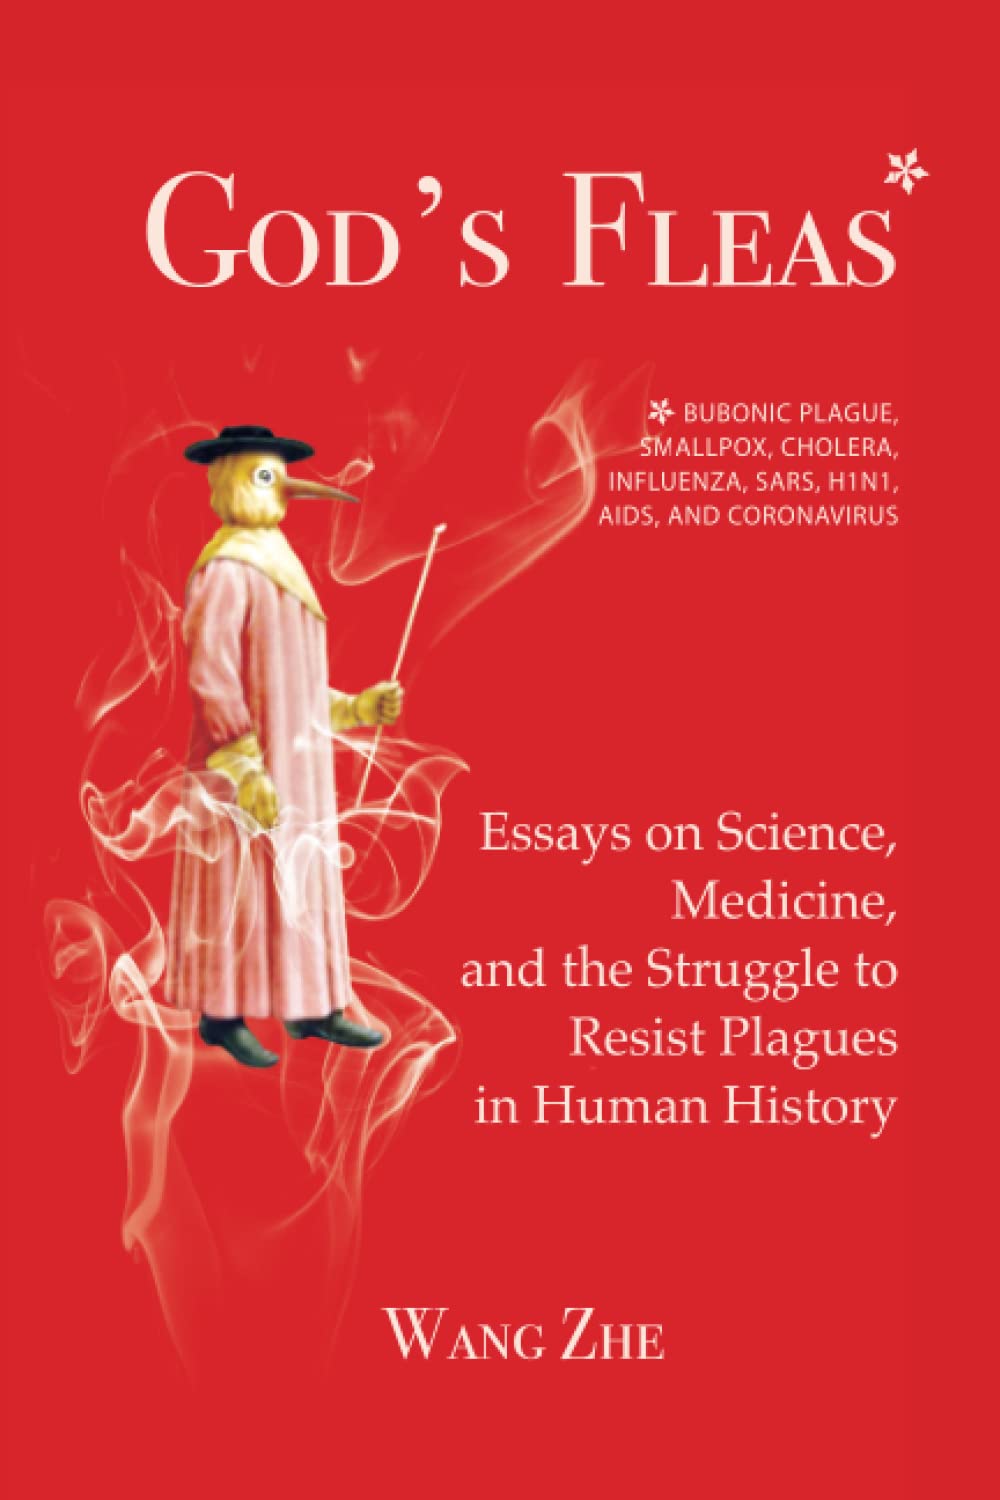 God's Fleas: Essays on Science, Medicine, and the Struggle to Resist Plagues in Human History